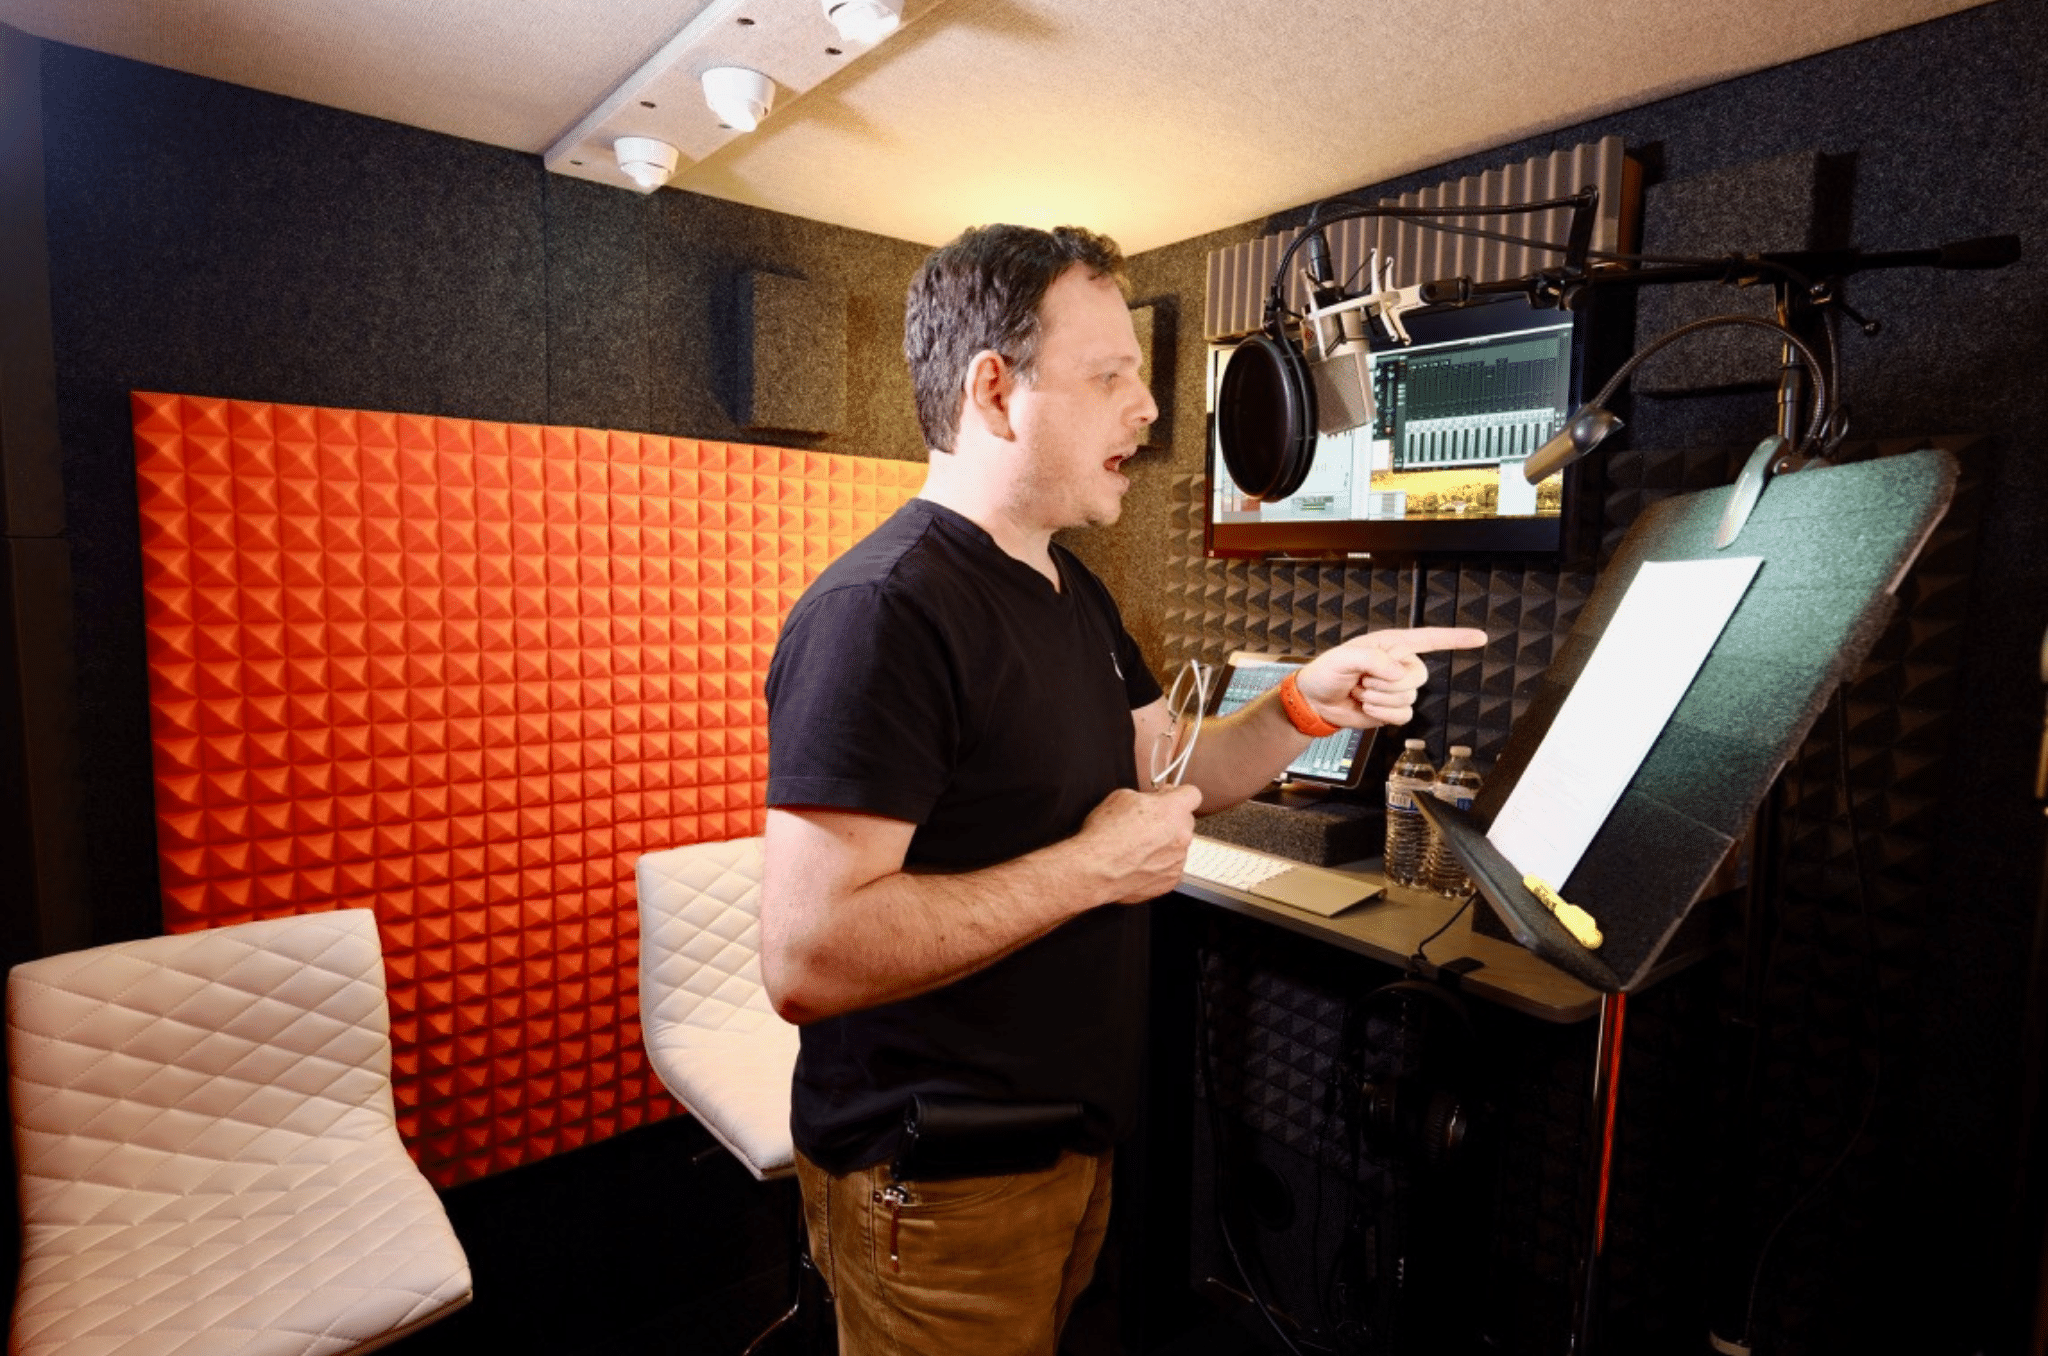 Man standing inside his WhisperRoom vocal booth, recording a voice-over take. A computer is mounted to the interior wall, and he reads a script placed on a music stand.